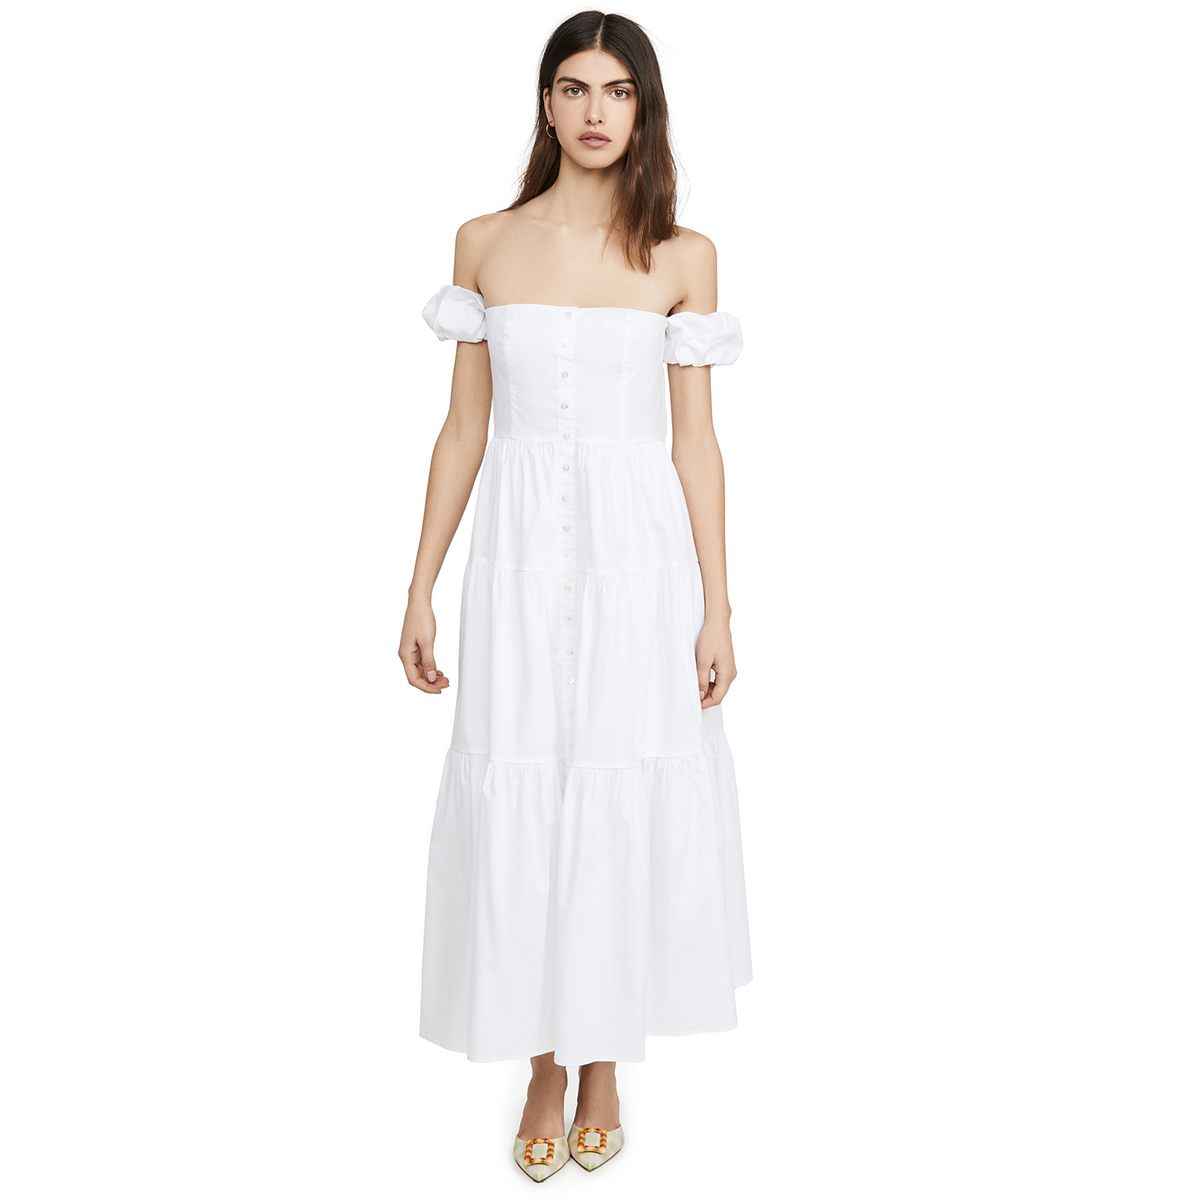 The 9 Best Brands for White Dresses | Who What Wear